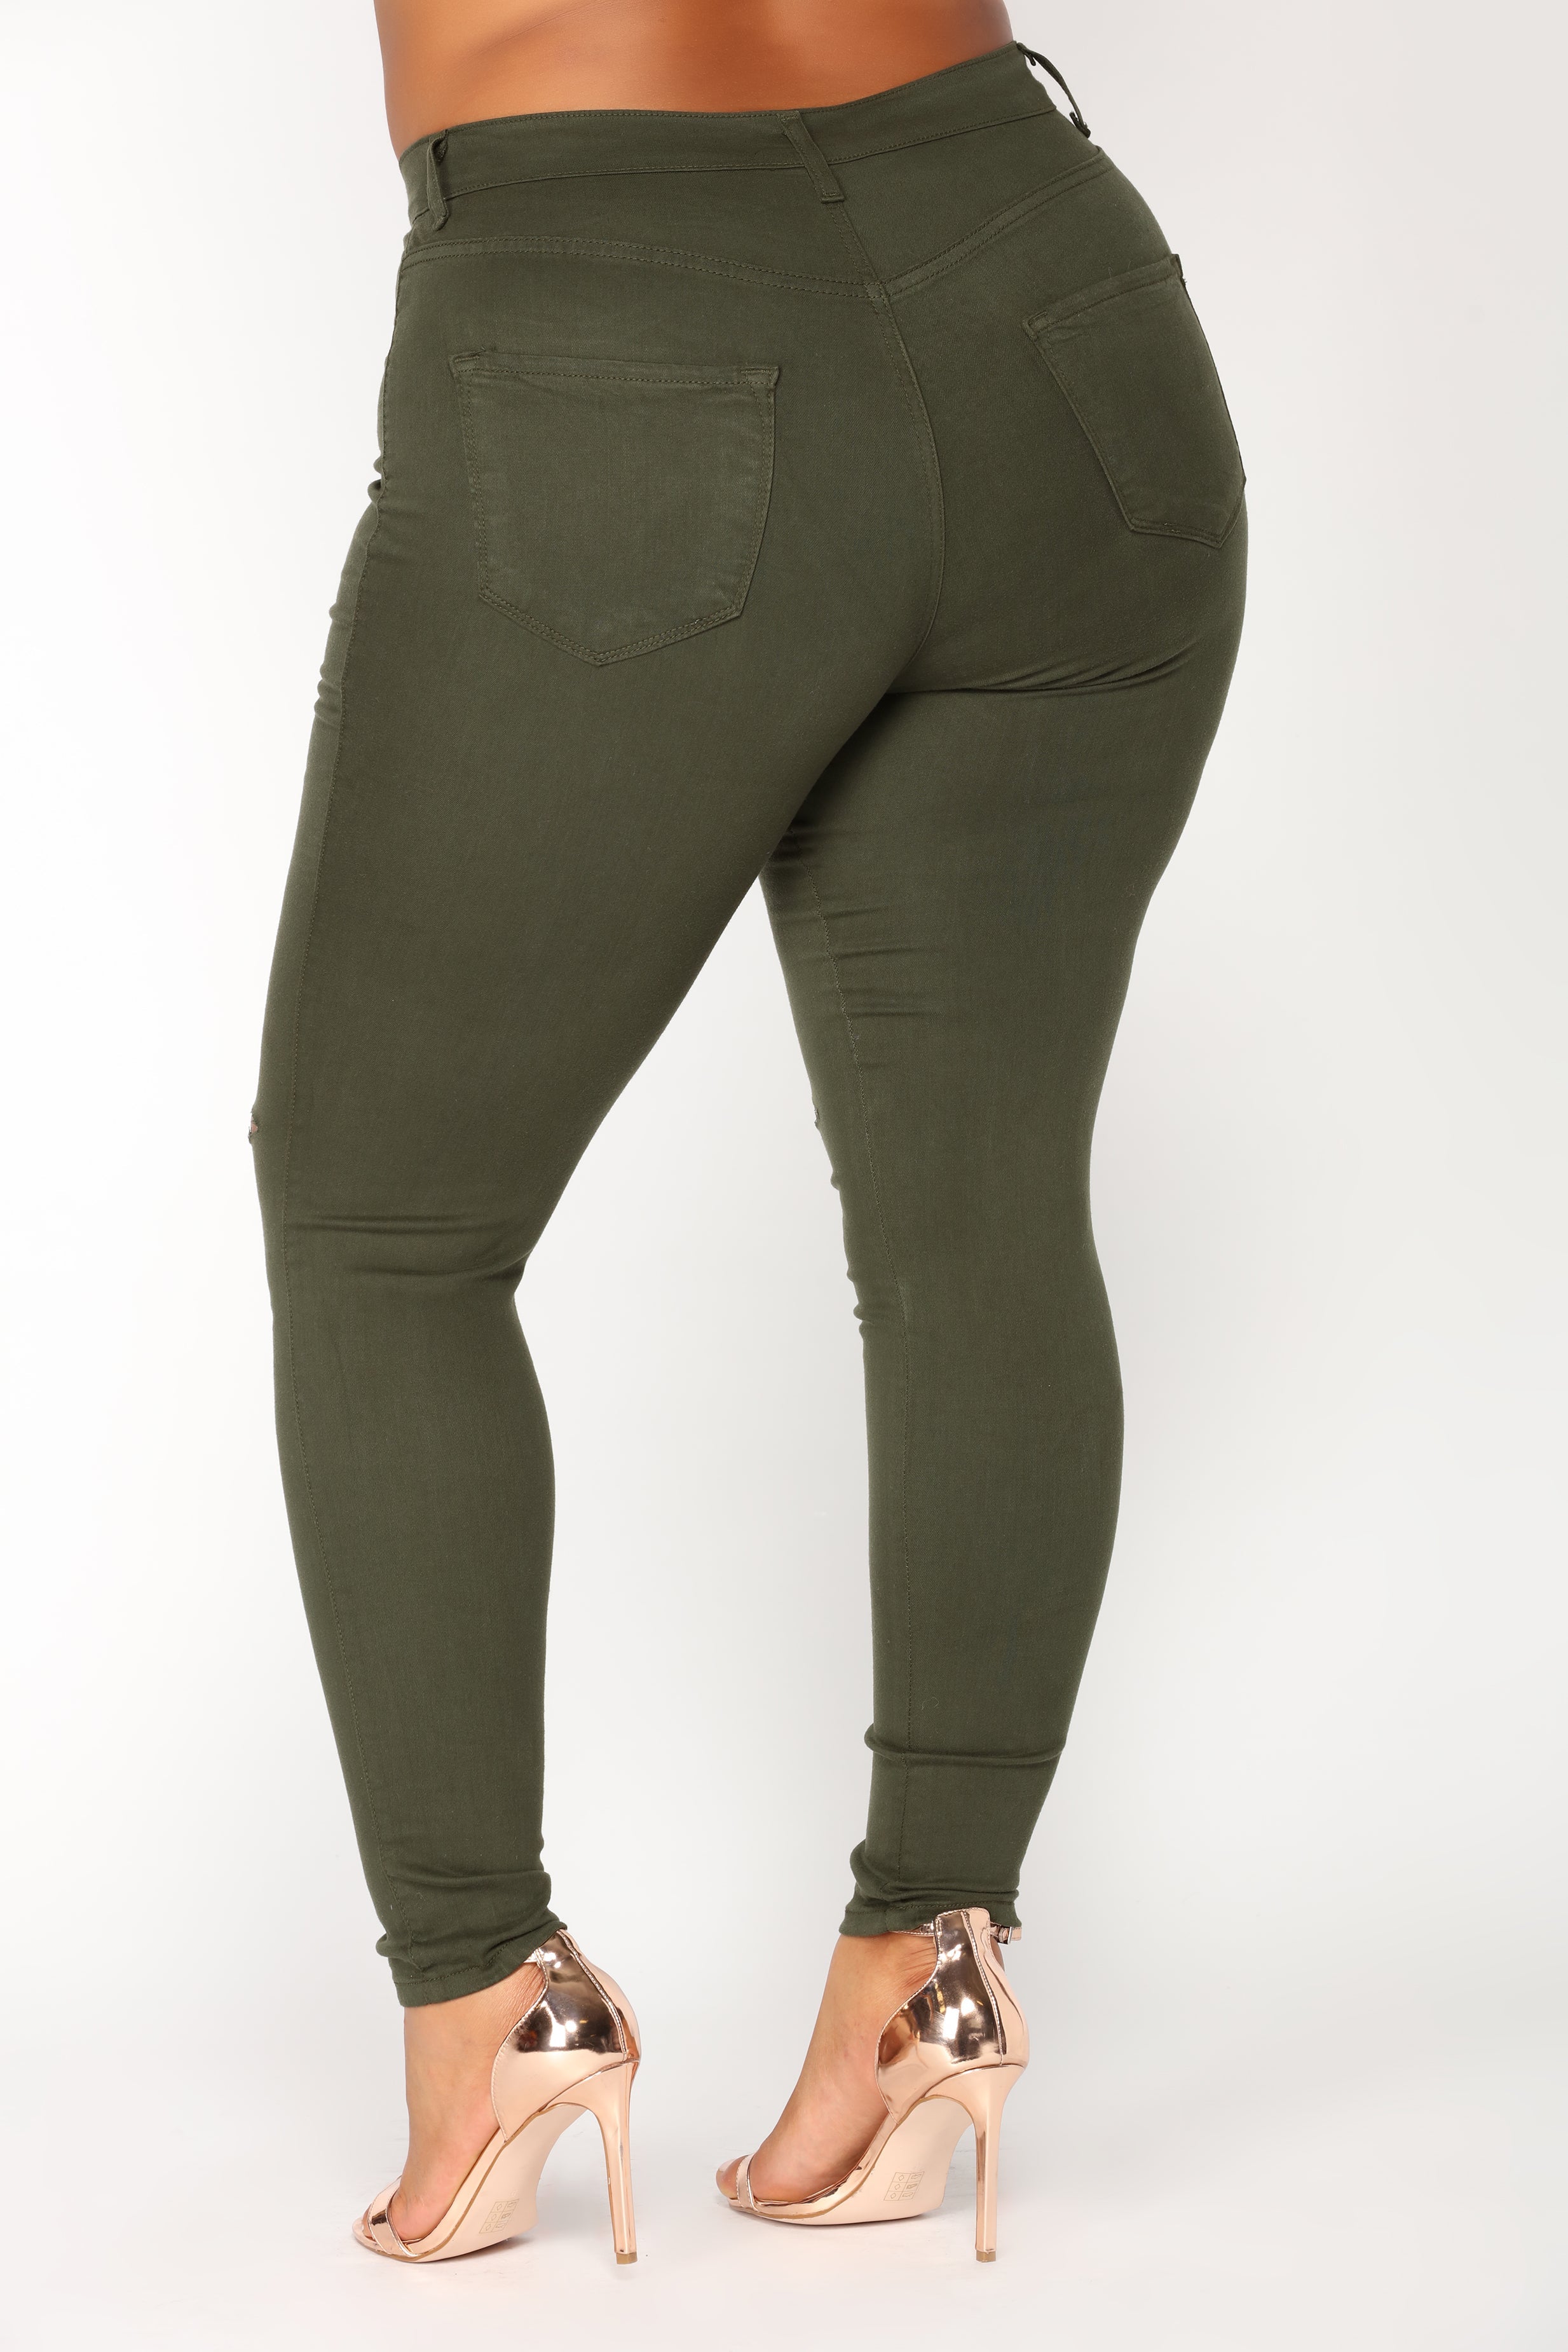 Canopy Jeans - Olive